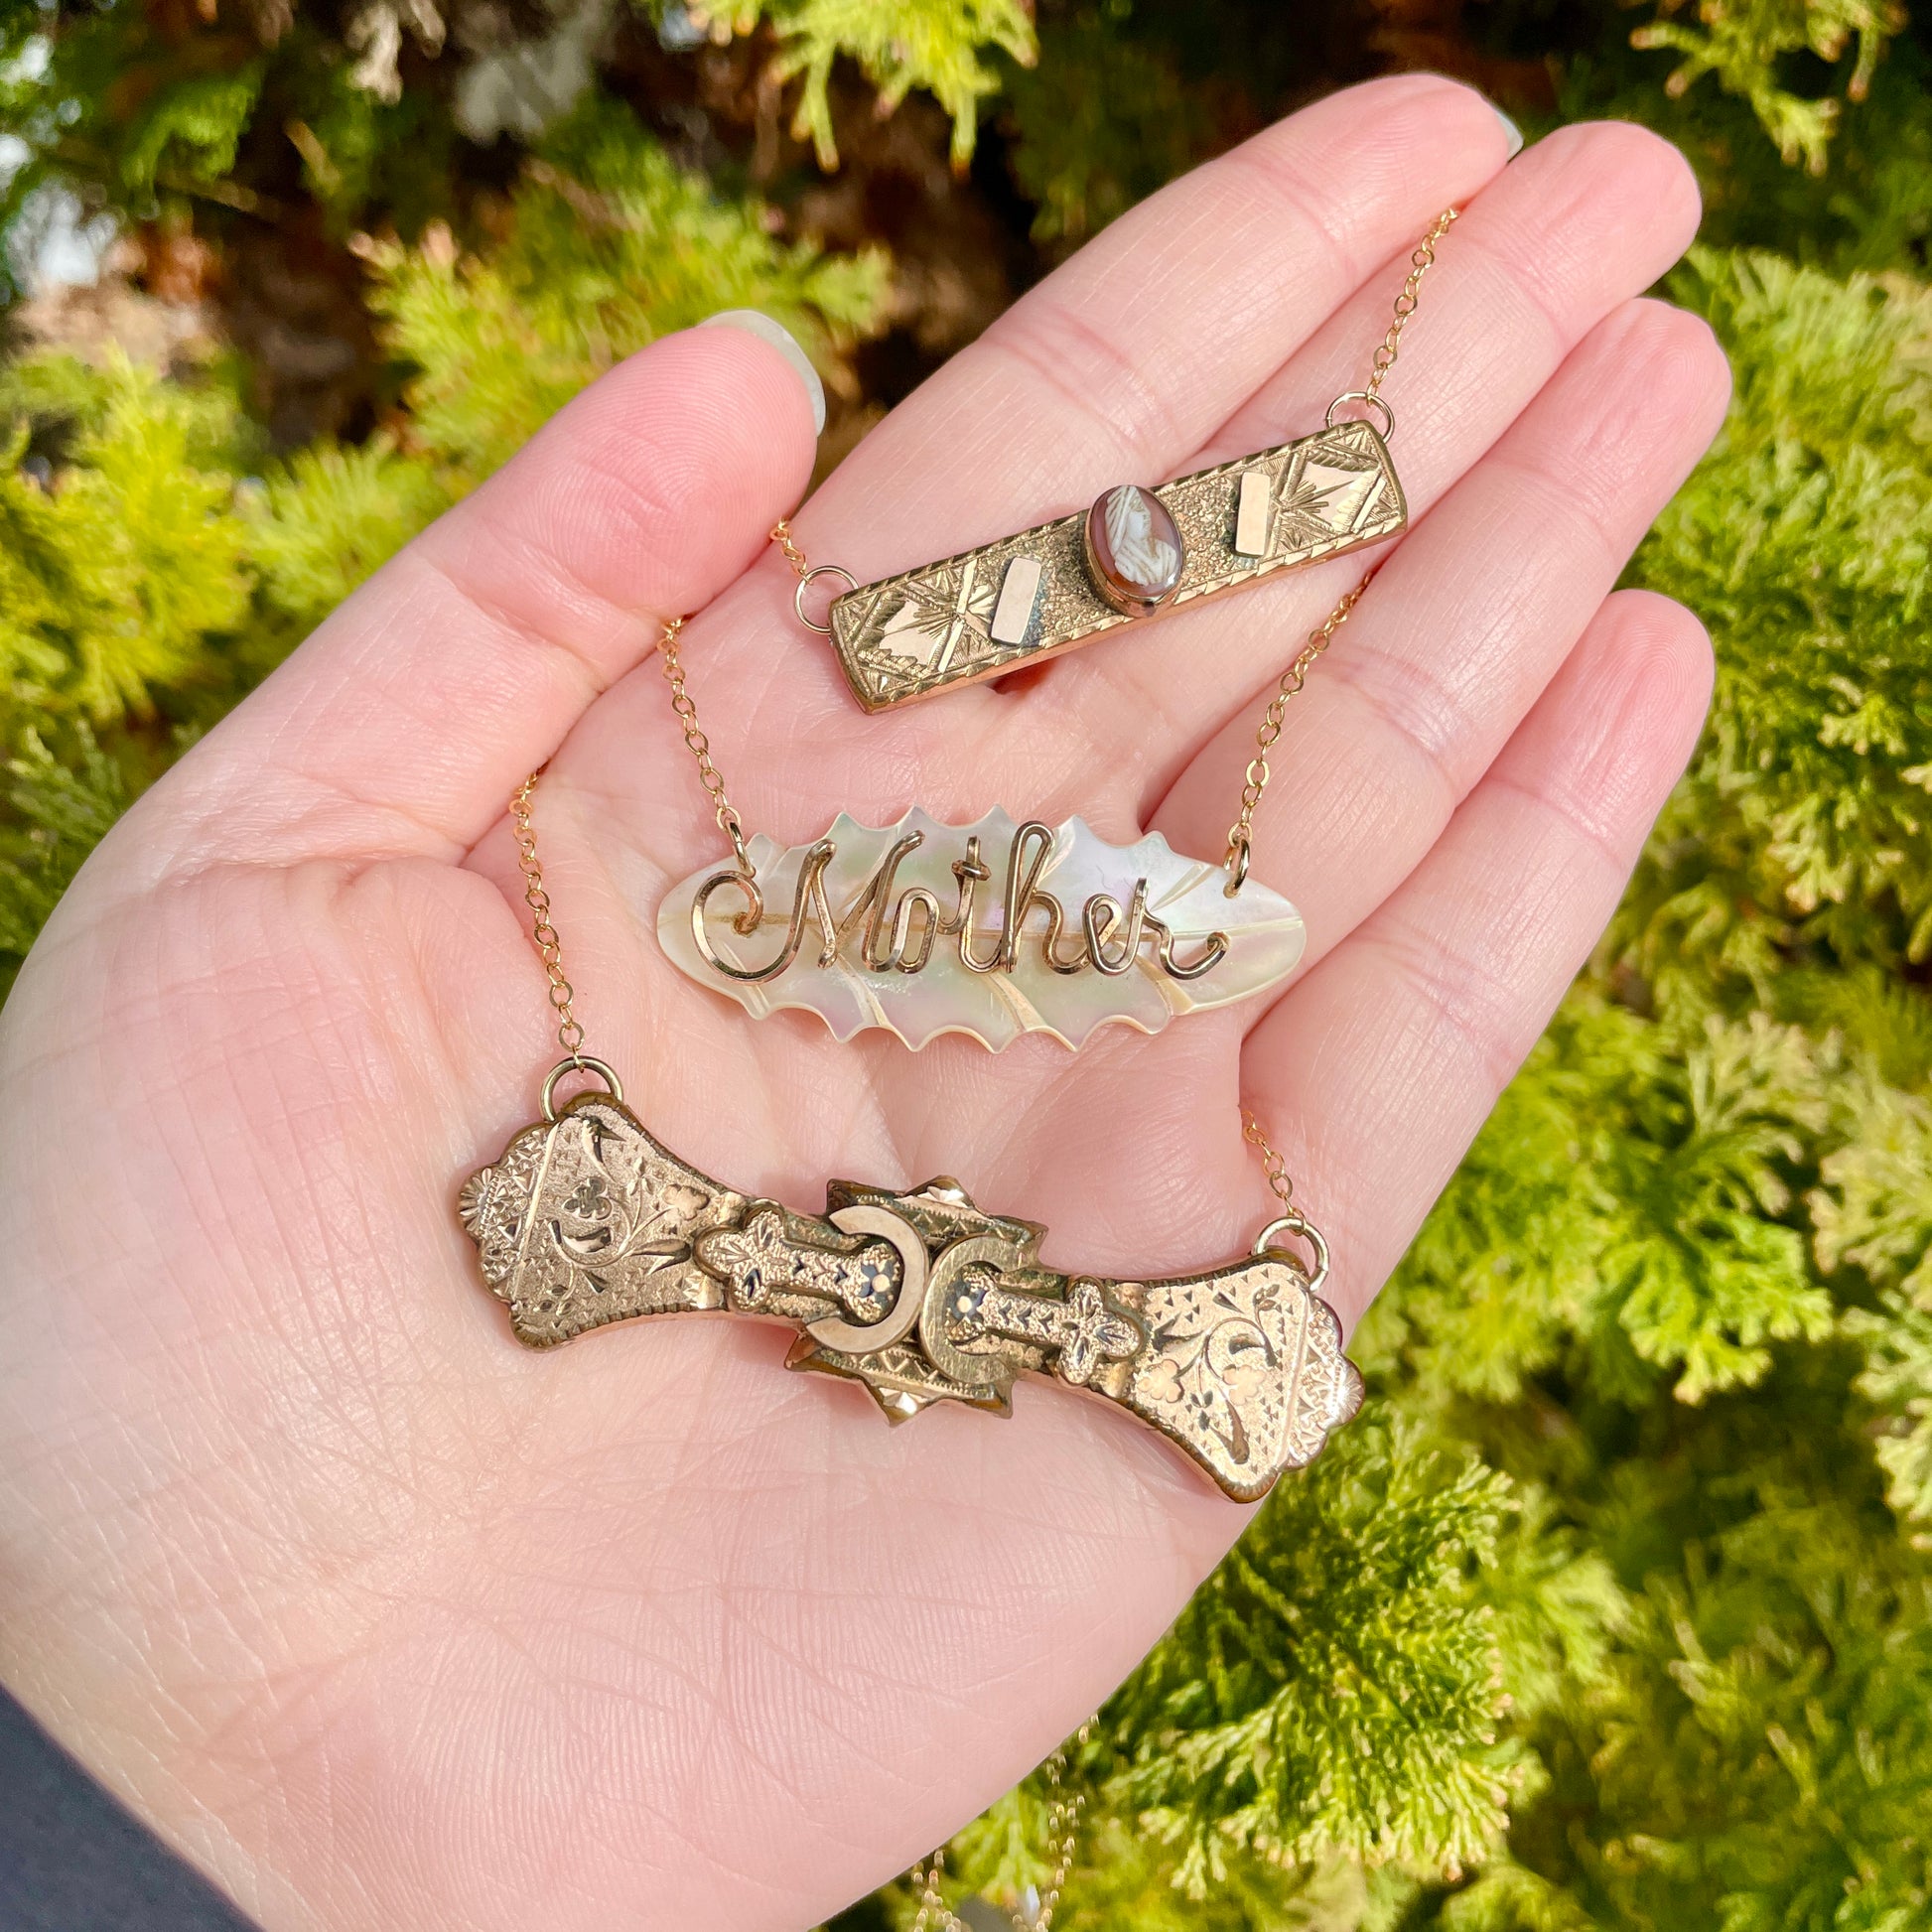 3 vintage and antique bar pin necklaces held on palm side of hand with green foliage background.